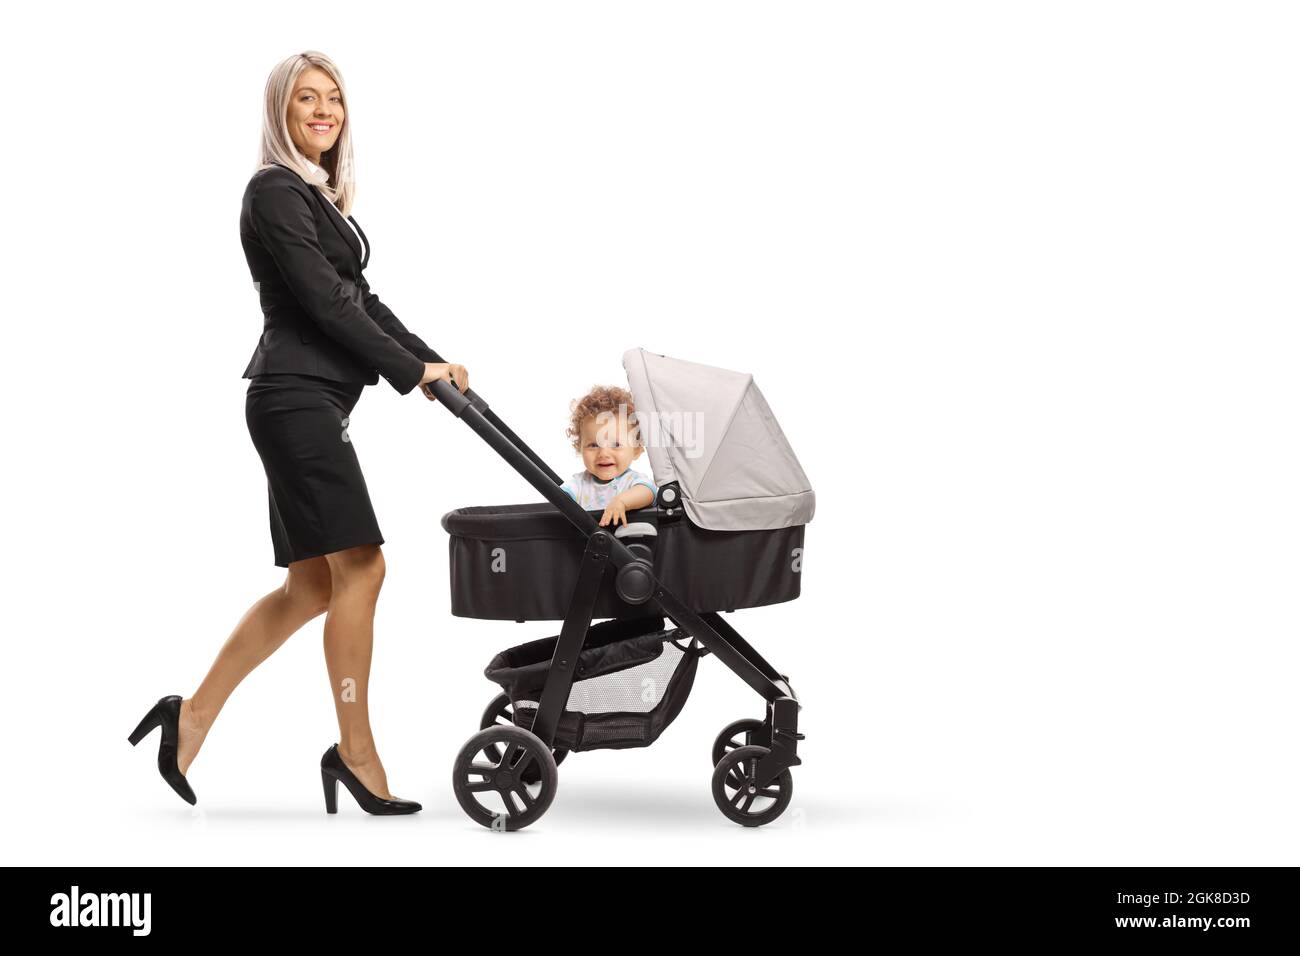 Full length shot of a businesswoman pushing a baby stroller isolated on white background Stock Photo